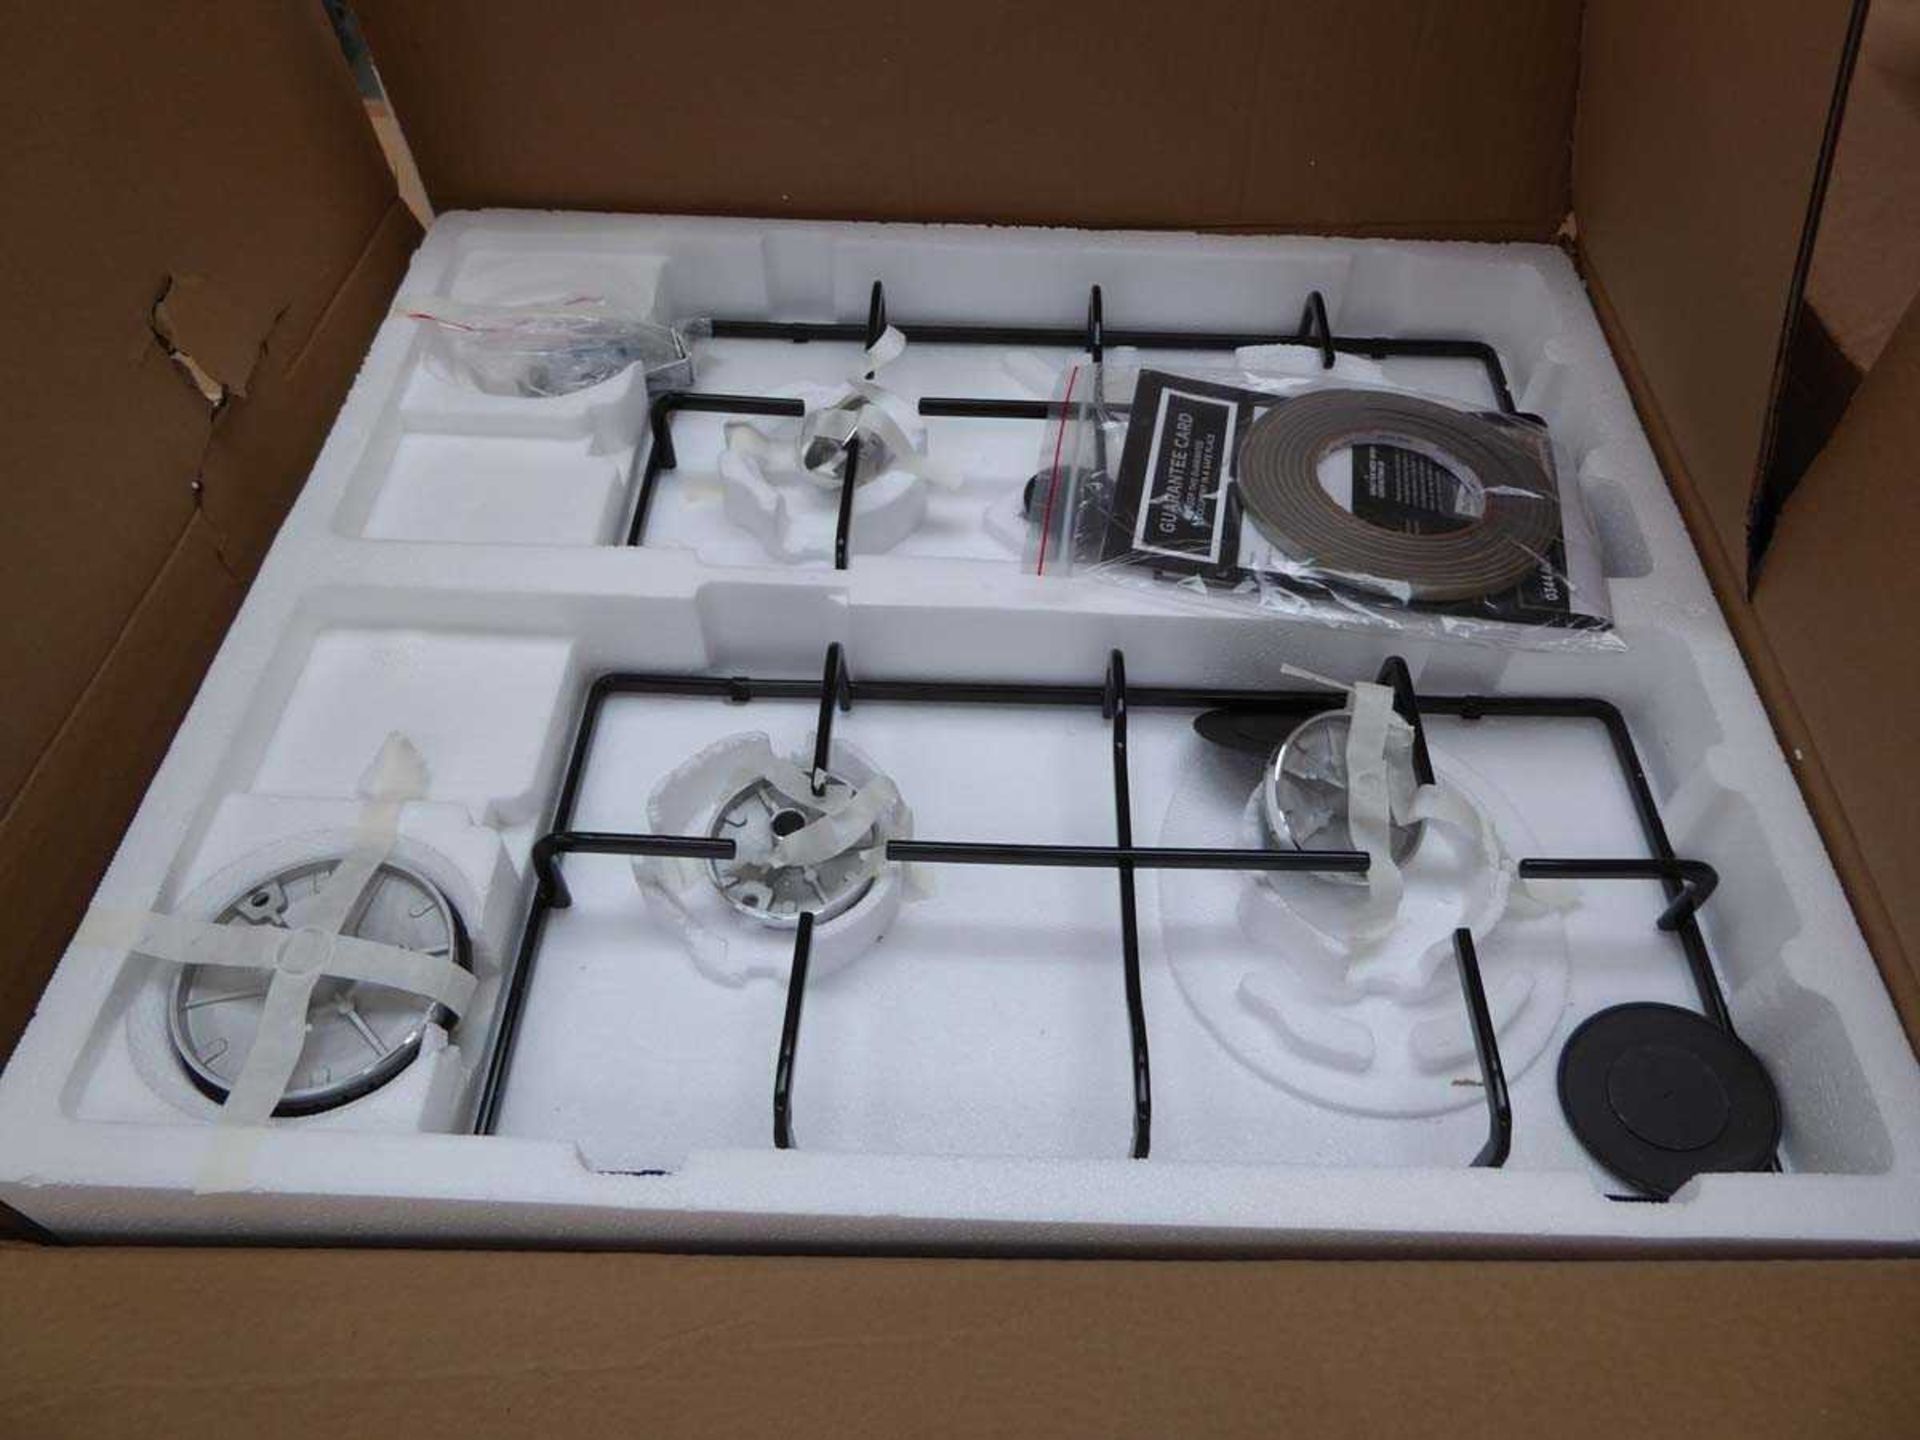 +VAT Boxed gas cooking panel Hotpoint